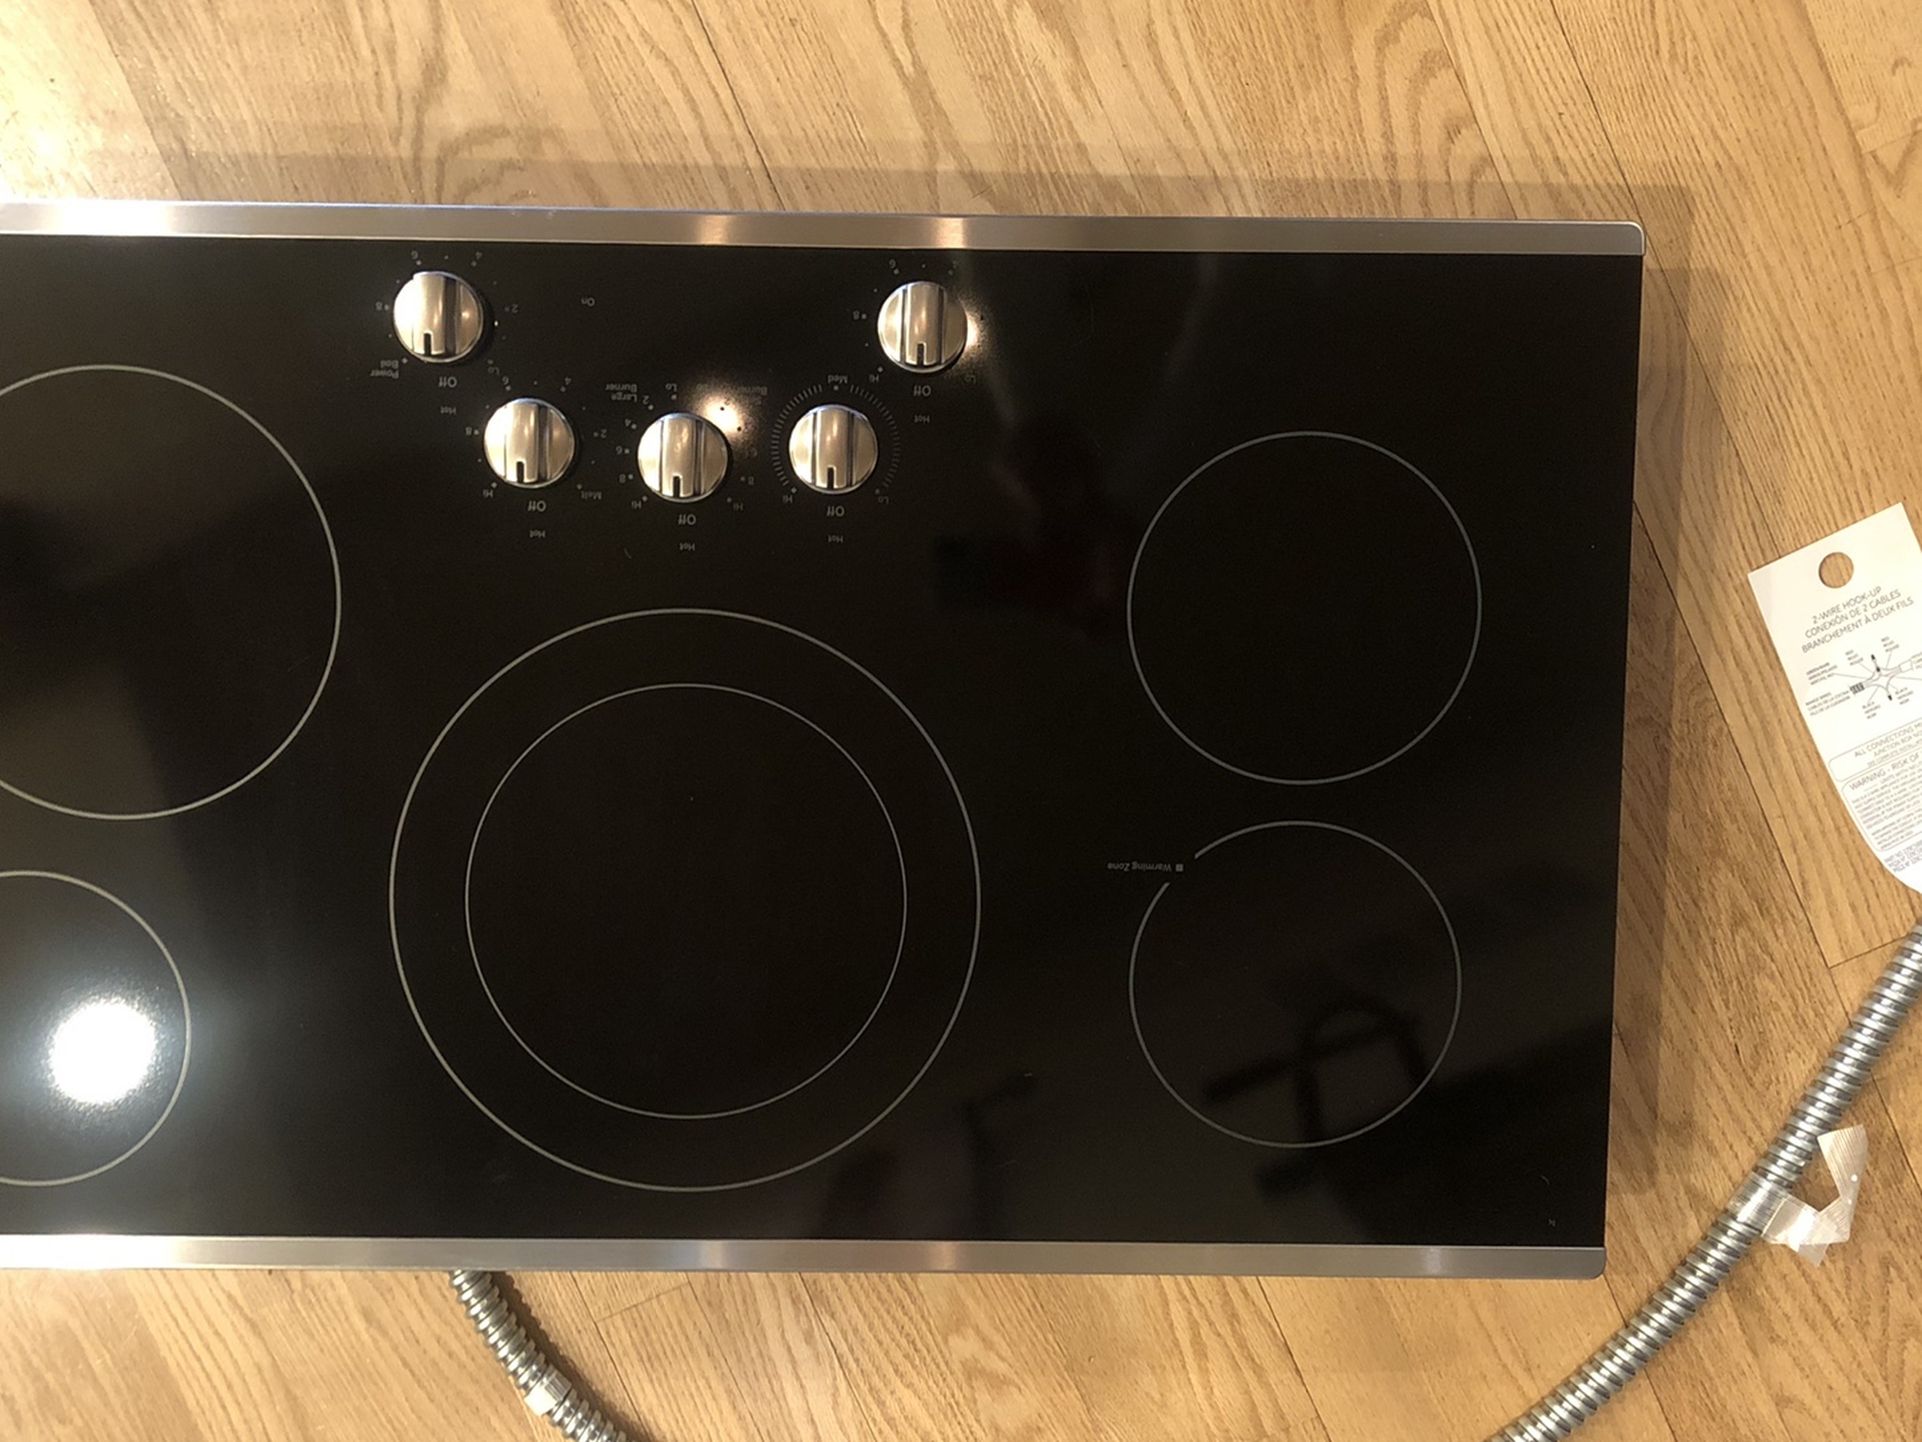 Electric Cooktop Built -in Knob Control In Stainless Steel With 5 Elements